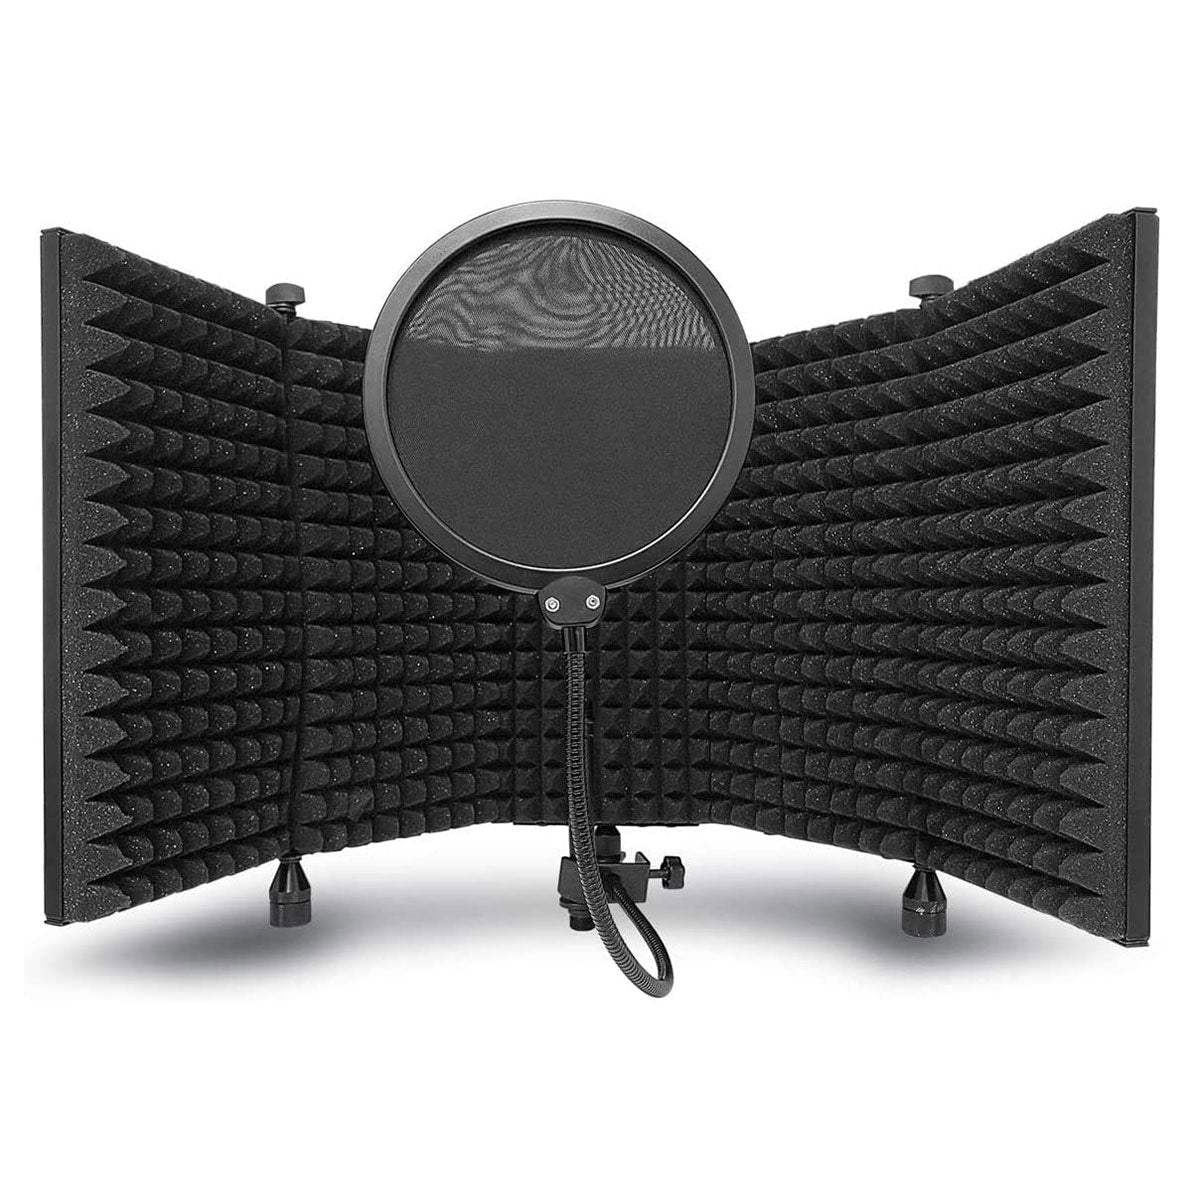 AxcessAbles SF-101VB 32.5"Wx13"H (422sq inch) Half Dome Vented Recording/ Podcast Isolation Shield with Desktop Standing Knobs and Microphone Windpop Blocker (SF-101VB)